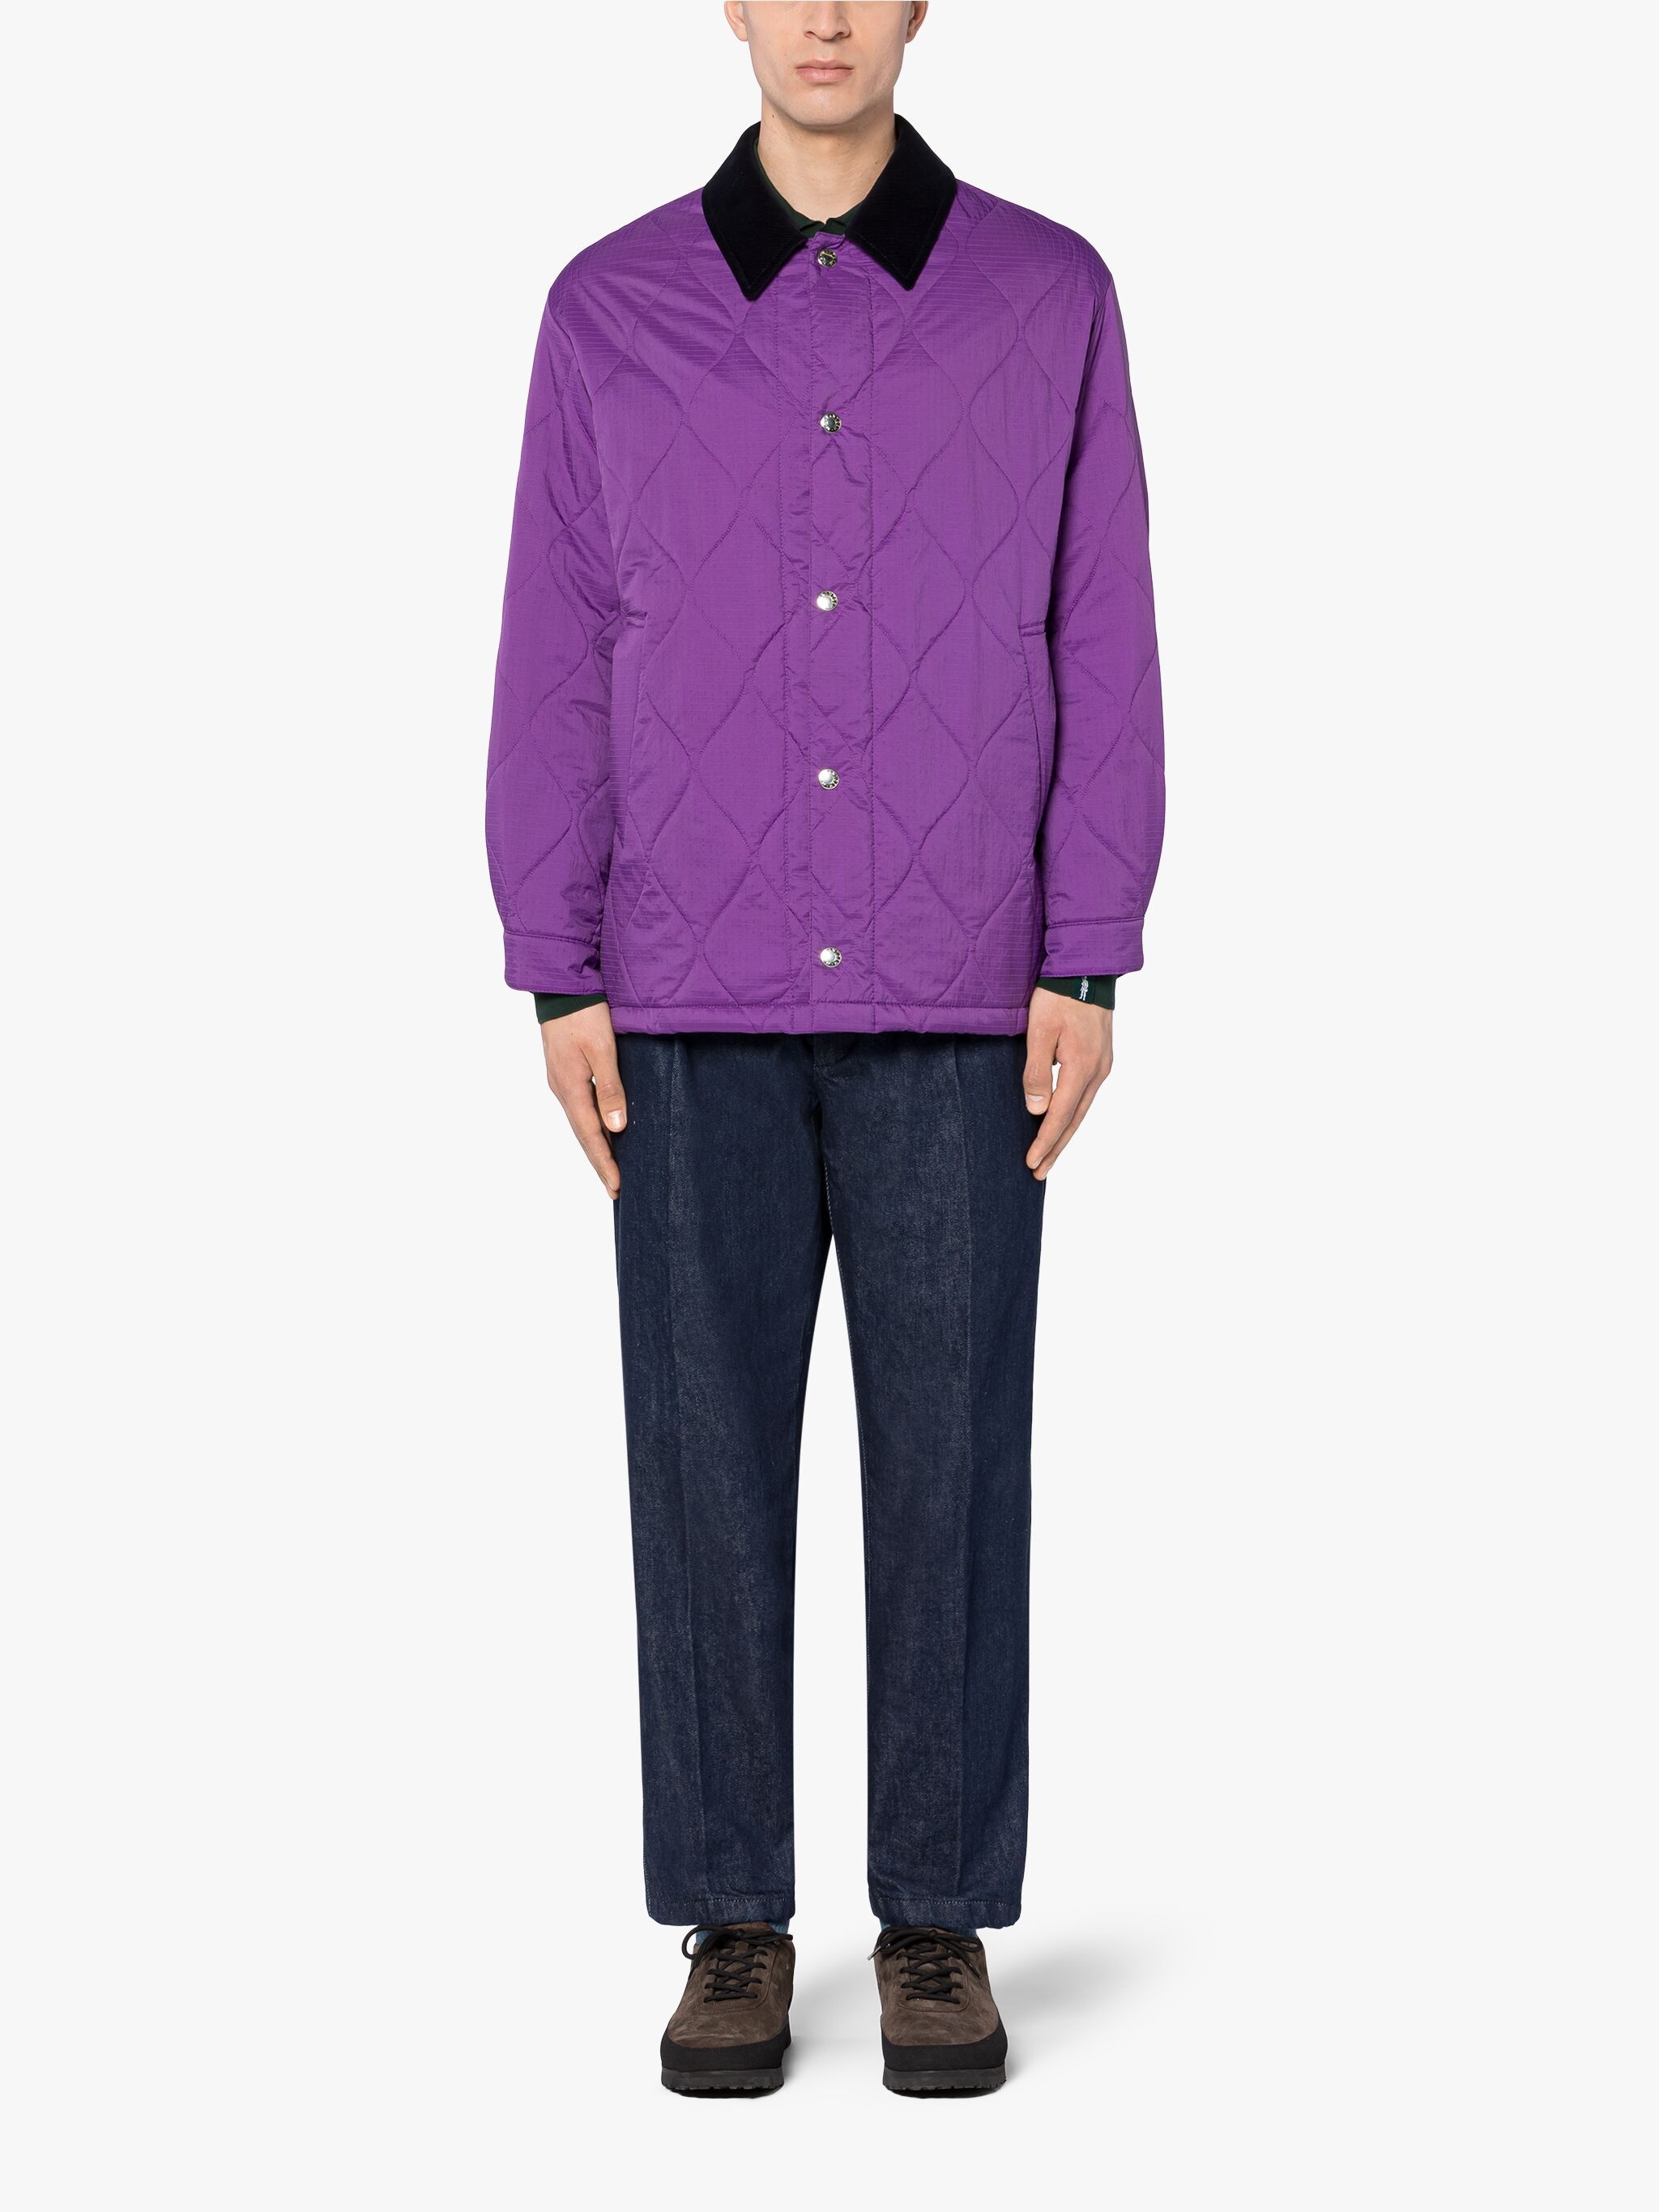 TEEMING PURPLE NYLON QUILTED COACH JACKET - 2